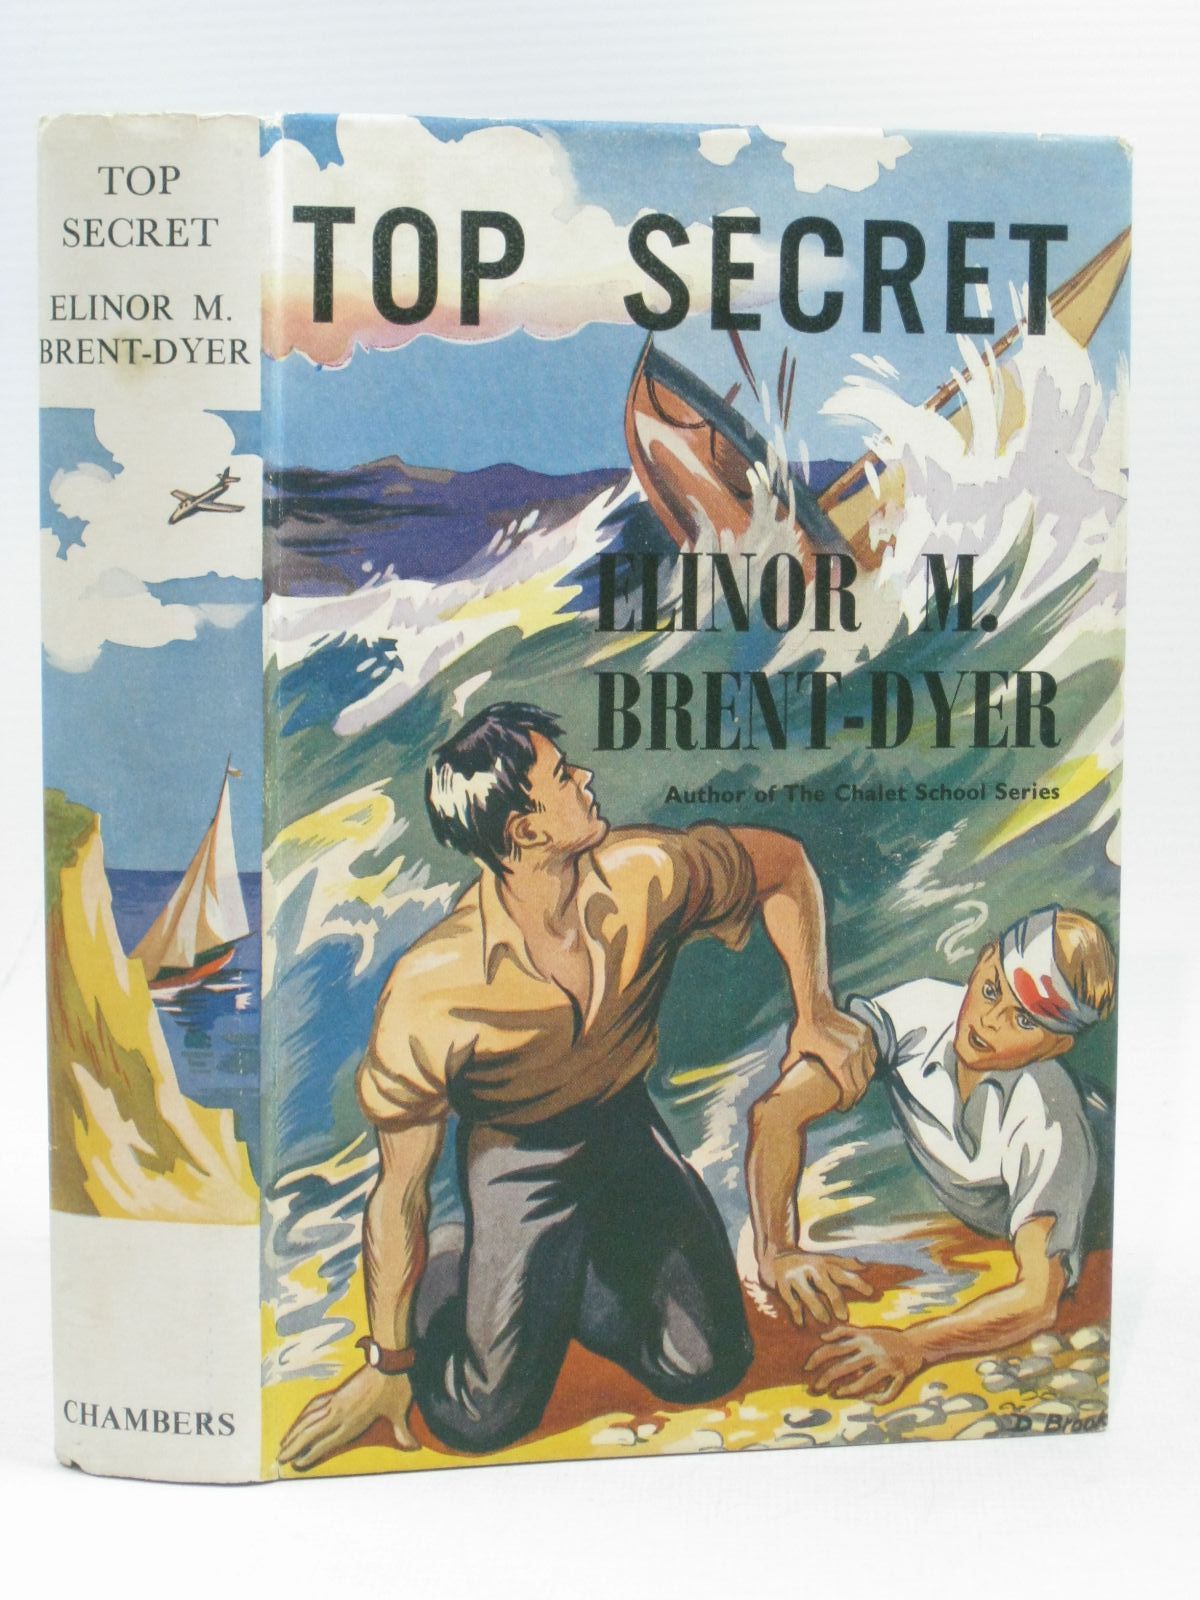 Cover of TOP SECRET by Elinor M. Brent-Dyer